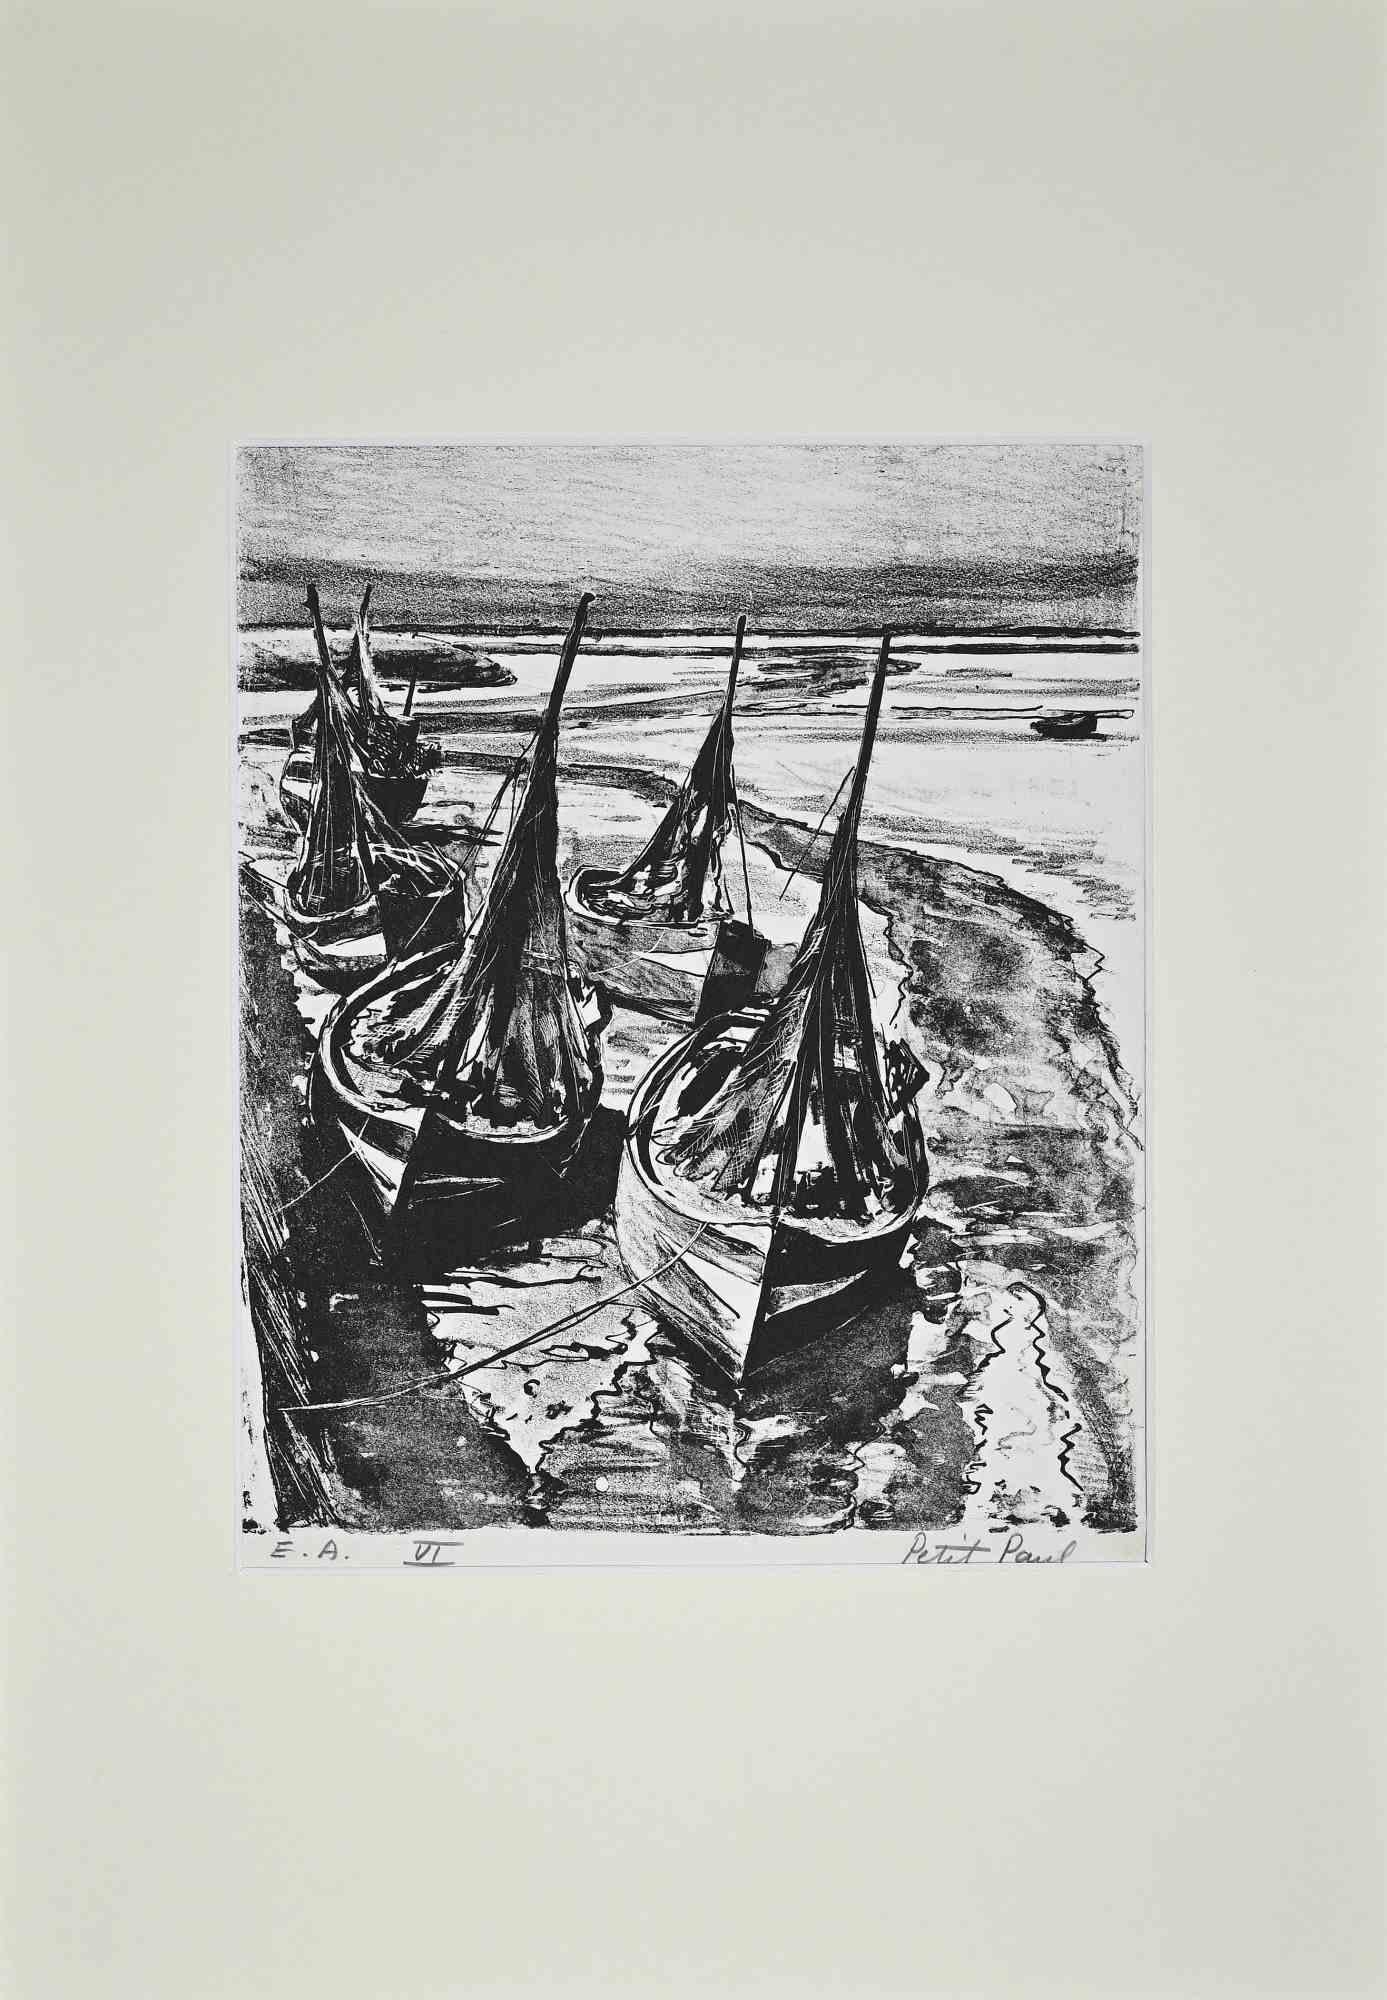 Ships - Original Lithograph by Paul Petit - Mid 20th Century 1